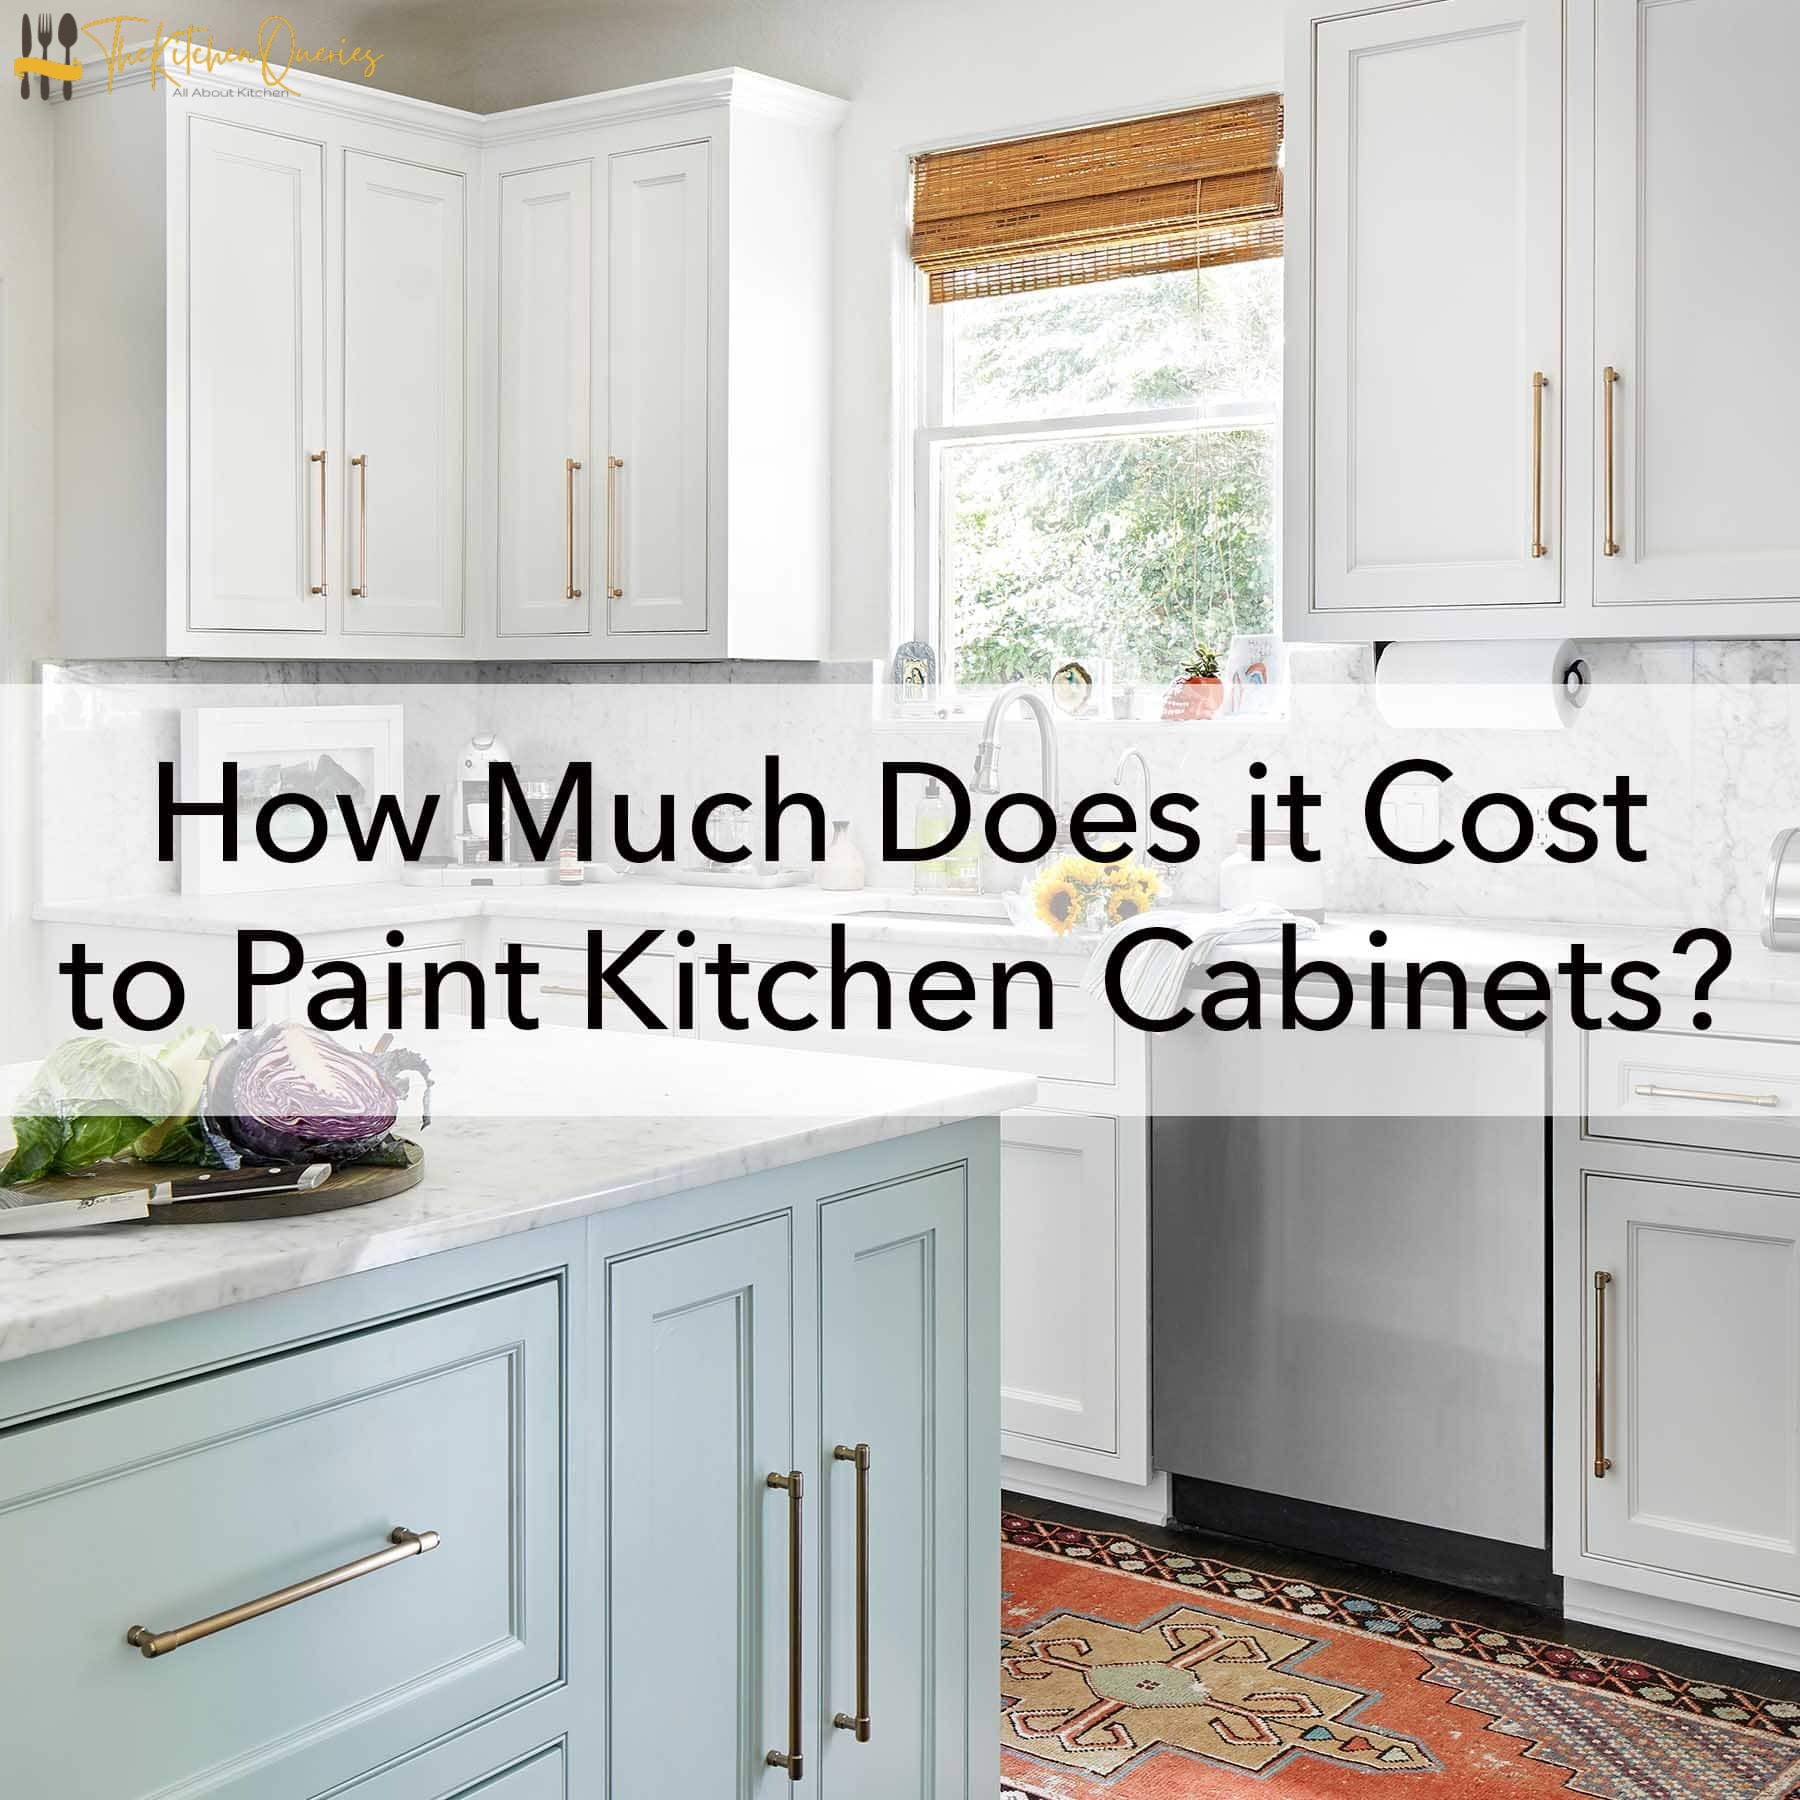 How Much Does It Cost to Paint Kitchen Cabinets-ink